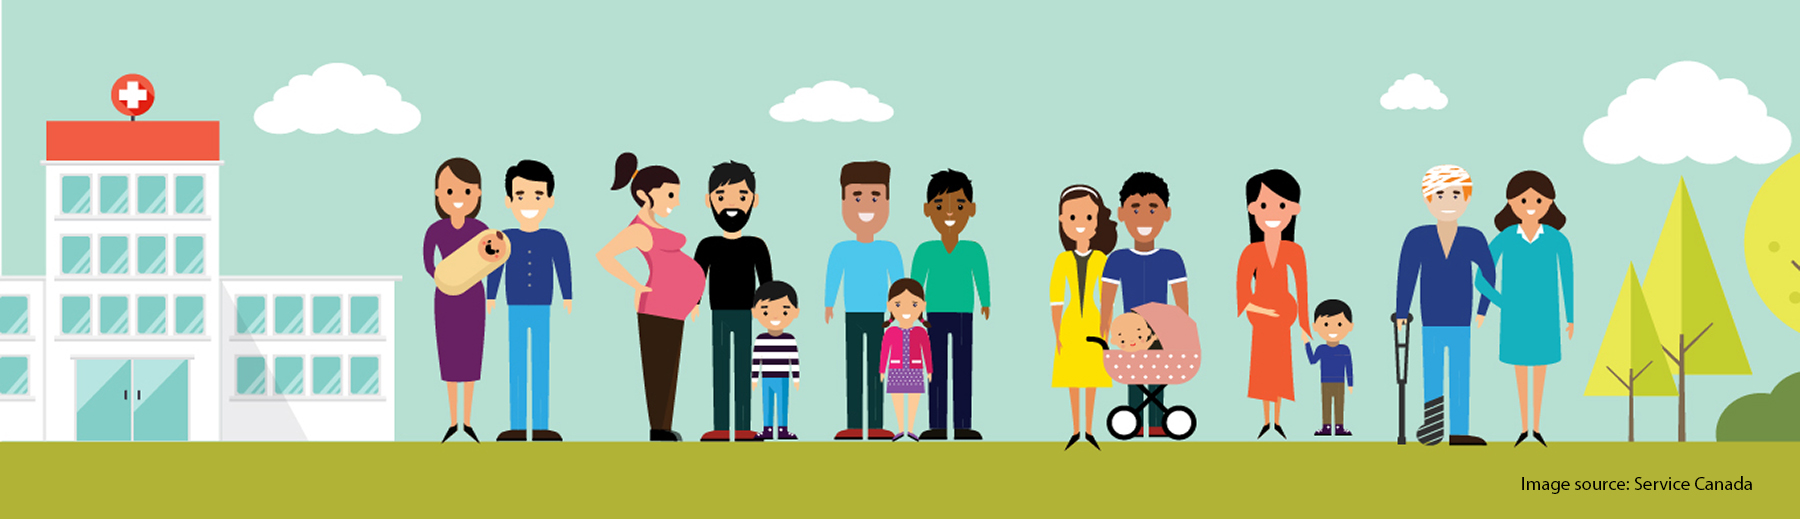 Cartoon image of many different people and family groups